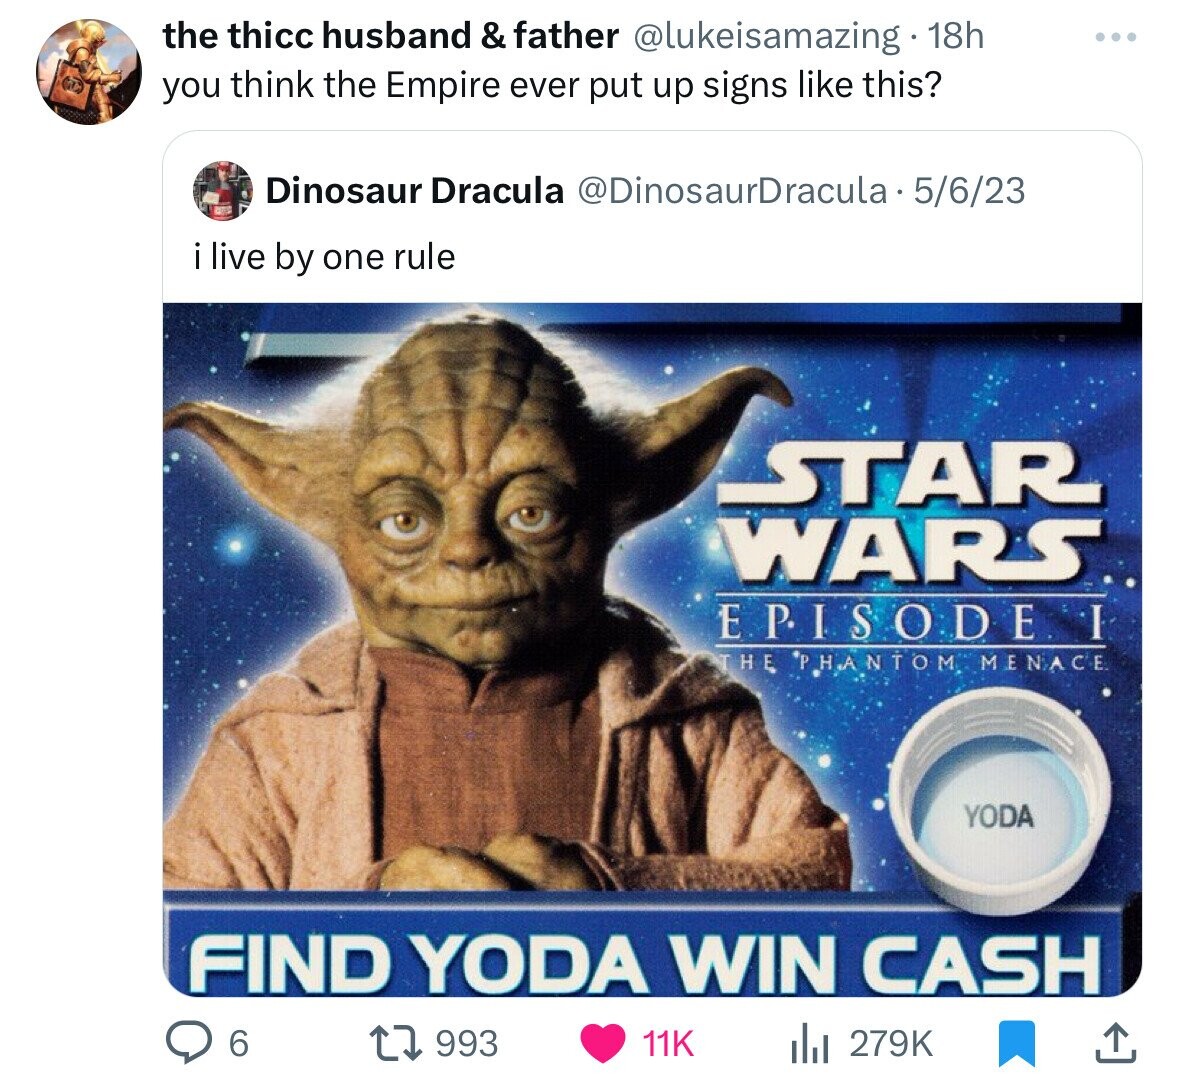 find yoda win cash - the thicc husband & father . 18h you think the Empire ever put up signs this? Dinosaur Dracula 5623 i live by one rule Star Wars Episode I The Phantom Menace Yoda Find Yoda Win Cash 6 l